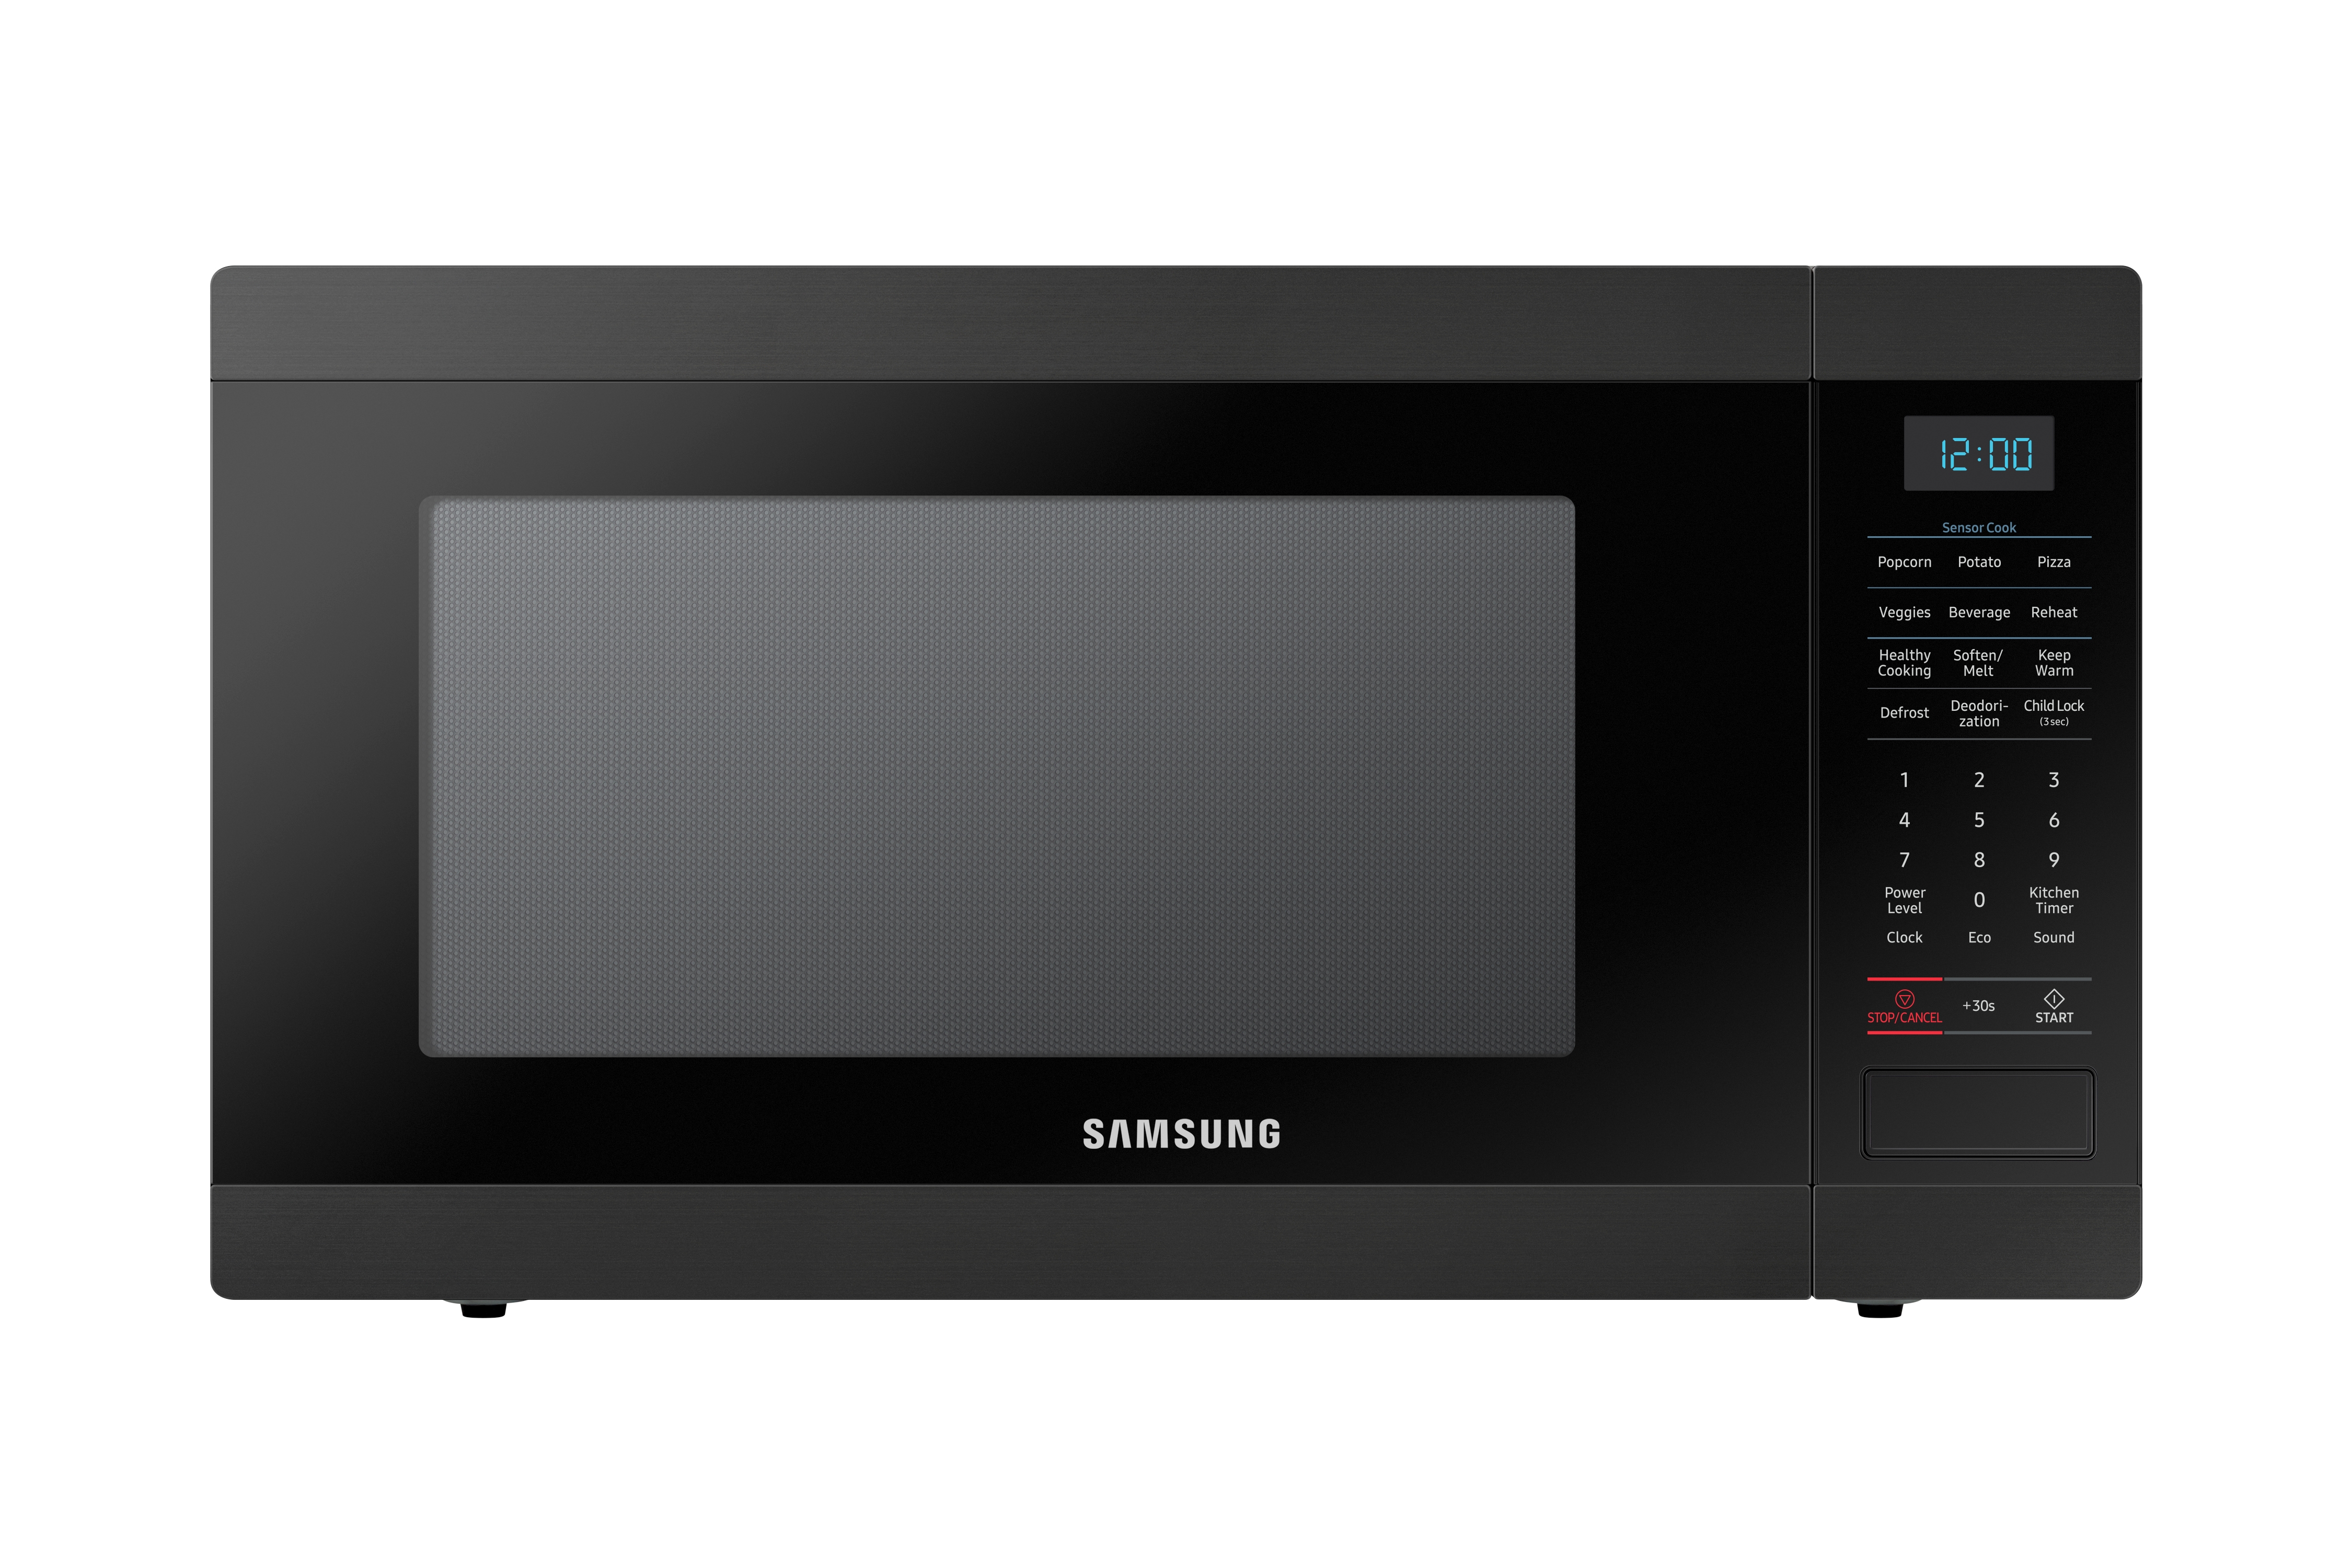 Galaxy MW-900-GUA Office Series Microwave with Push Button Controls - 120V,  900W